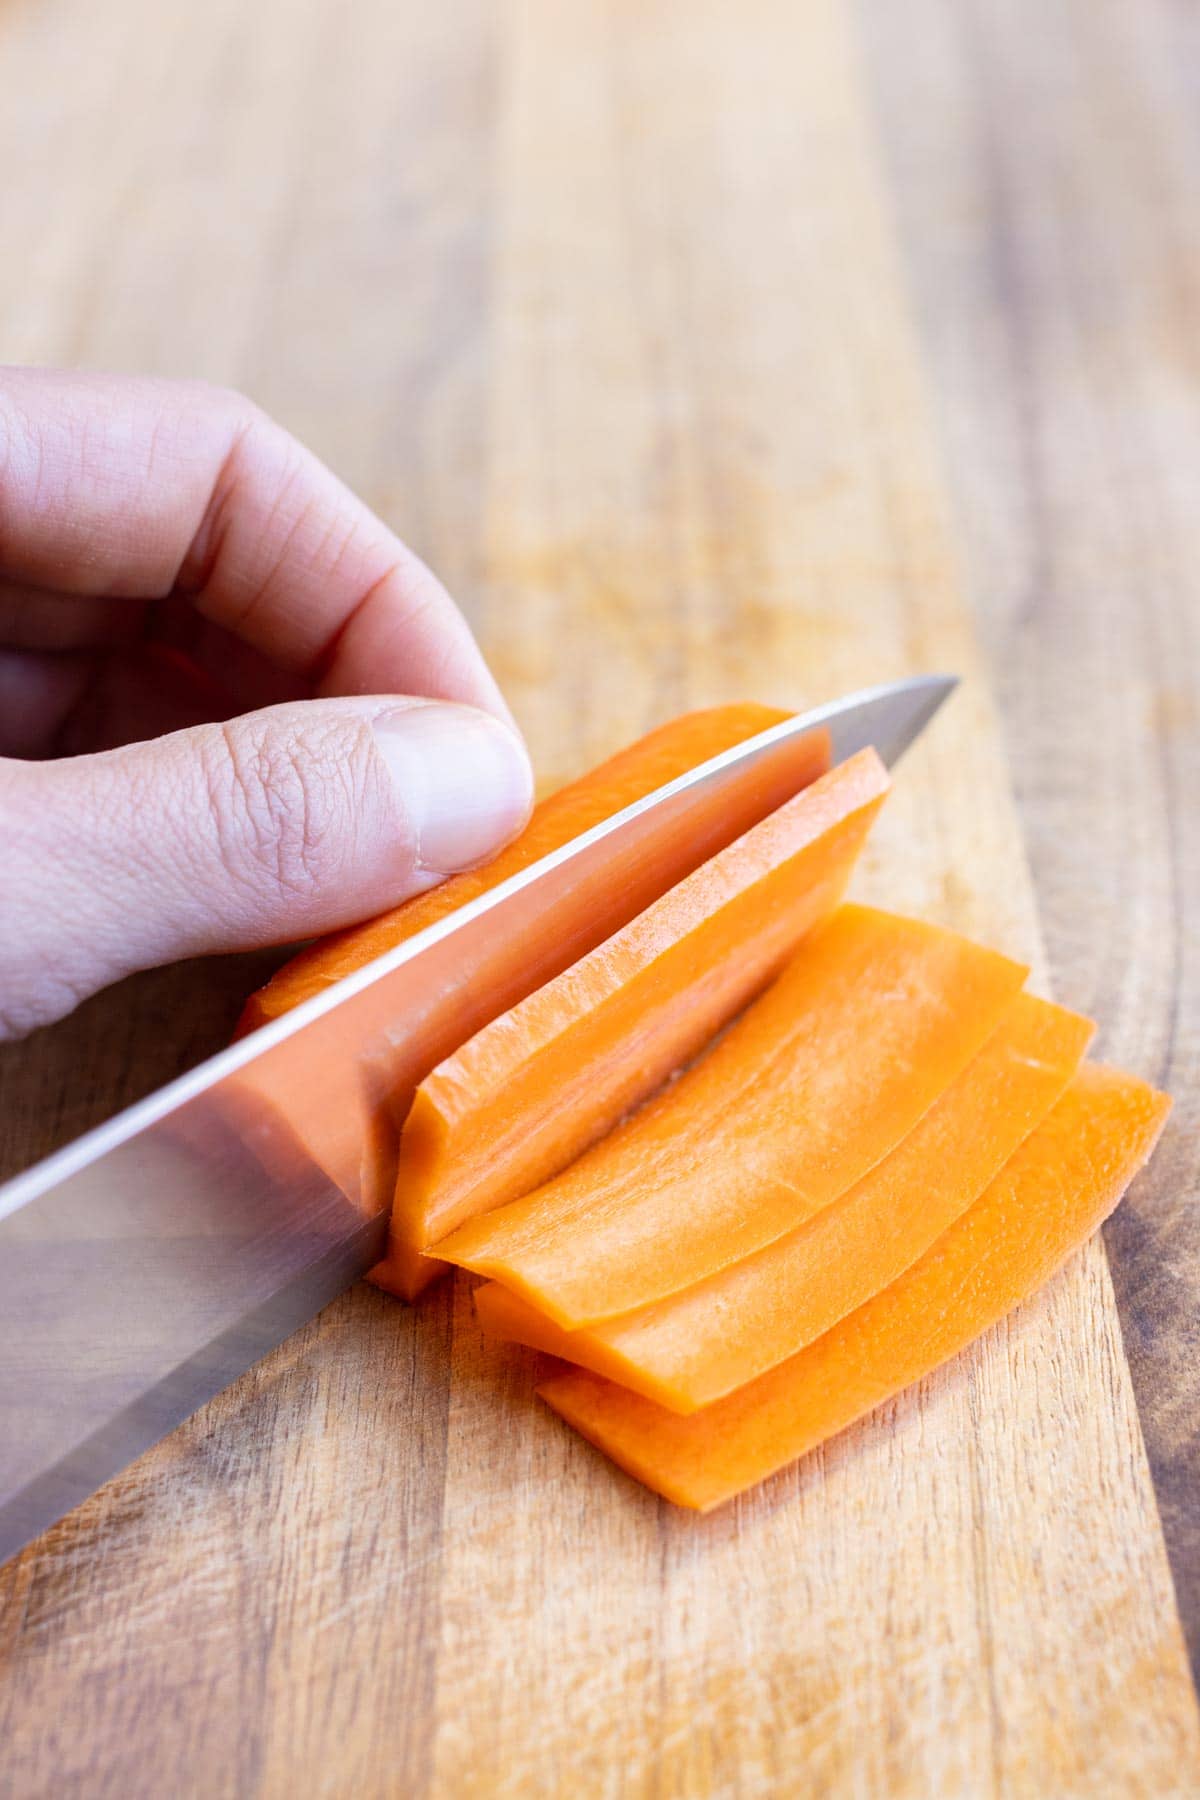 The raw carrot is cut into planks with a sharp knife.